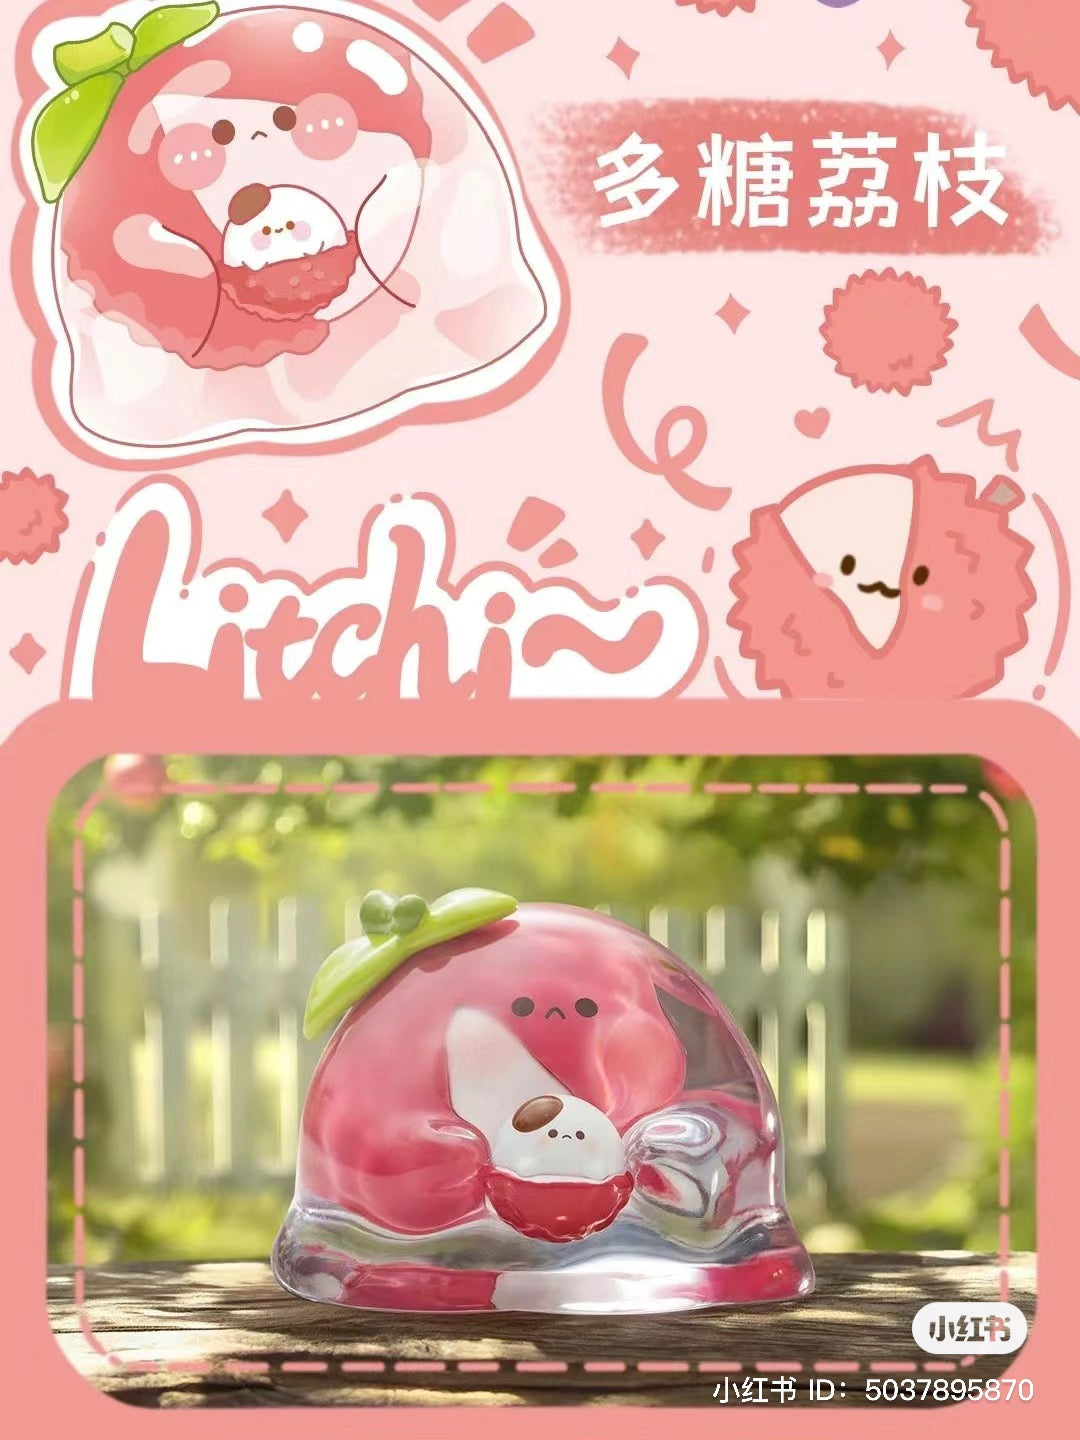 Alt text: Bubble Eggs Colorful Fruit Blind Box Series featuring a glass figurine of a pink cartoon animal.